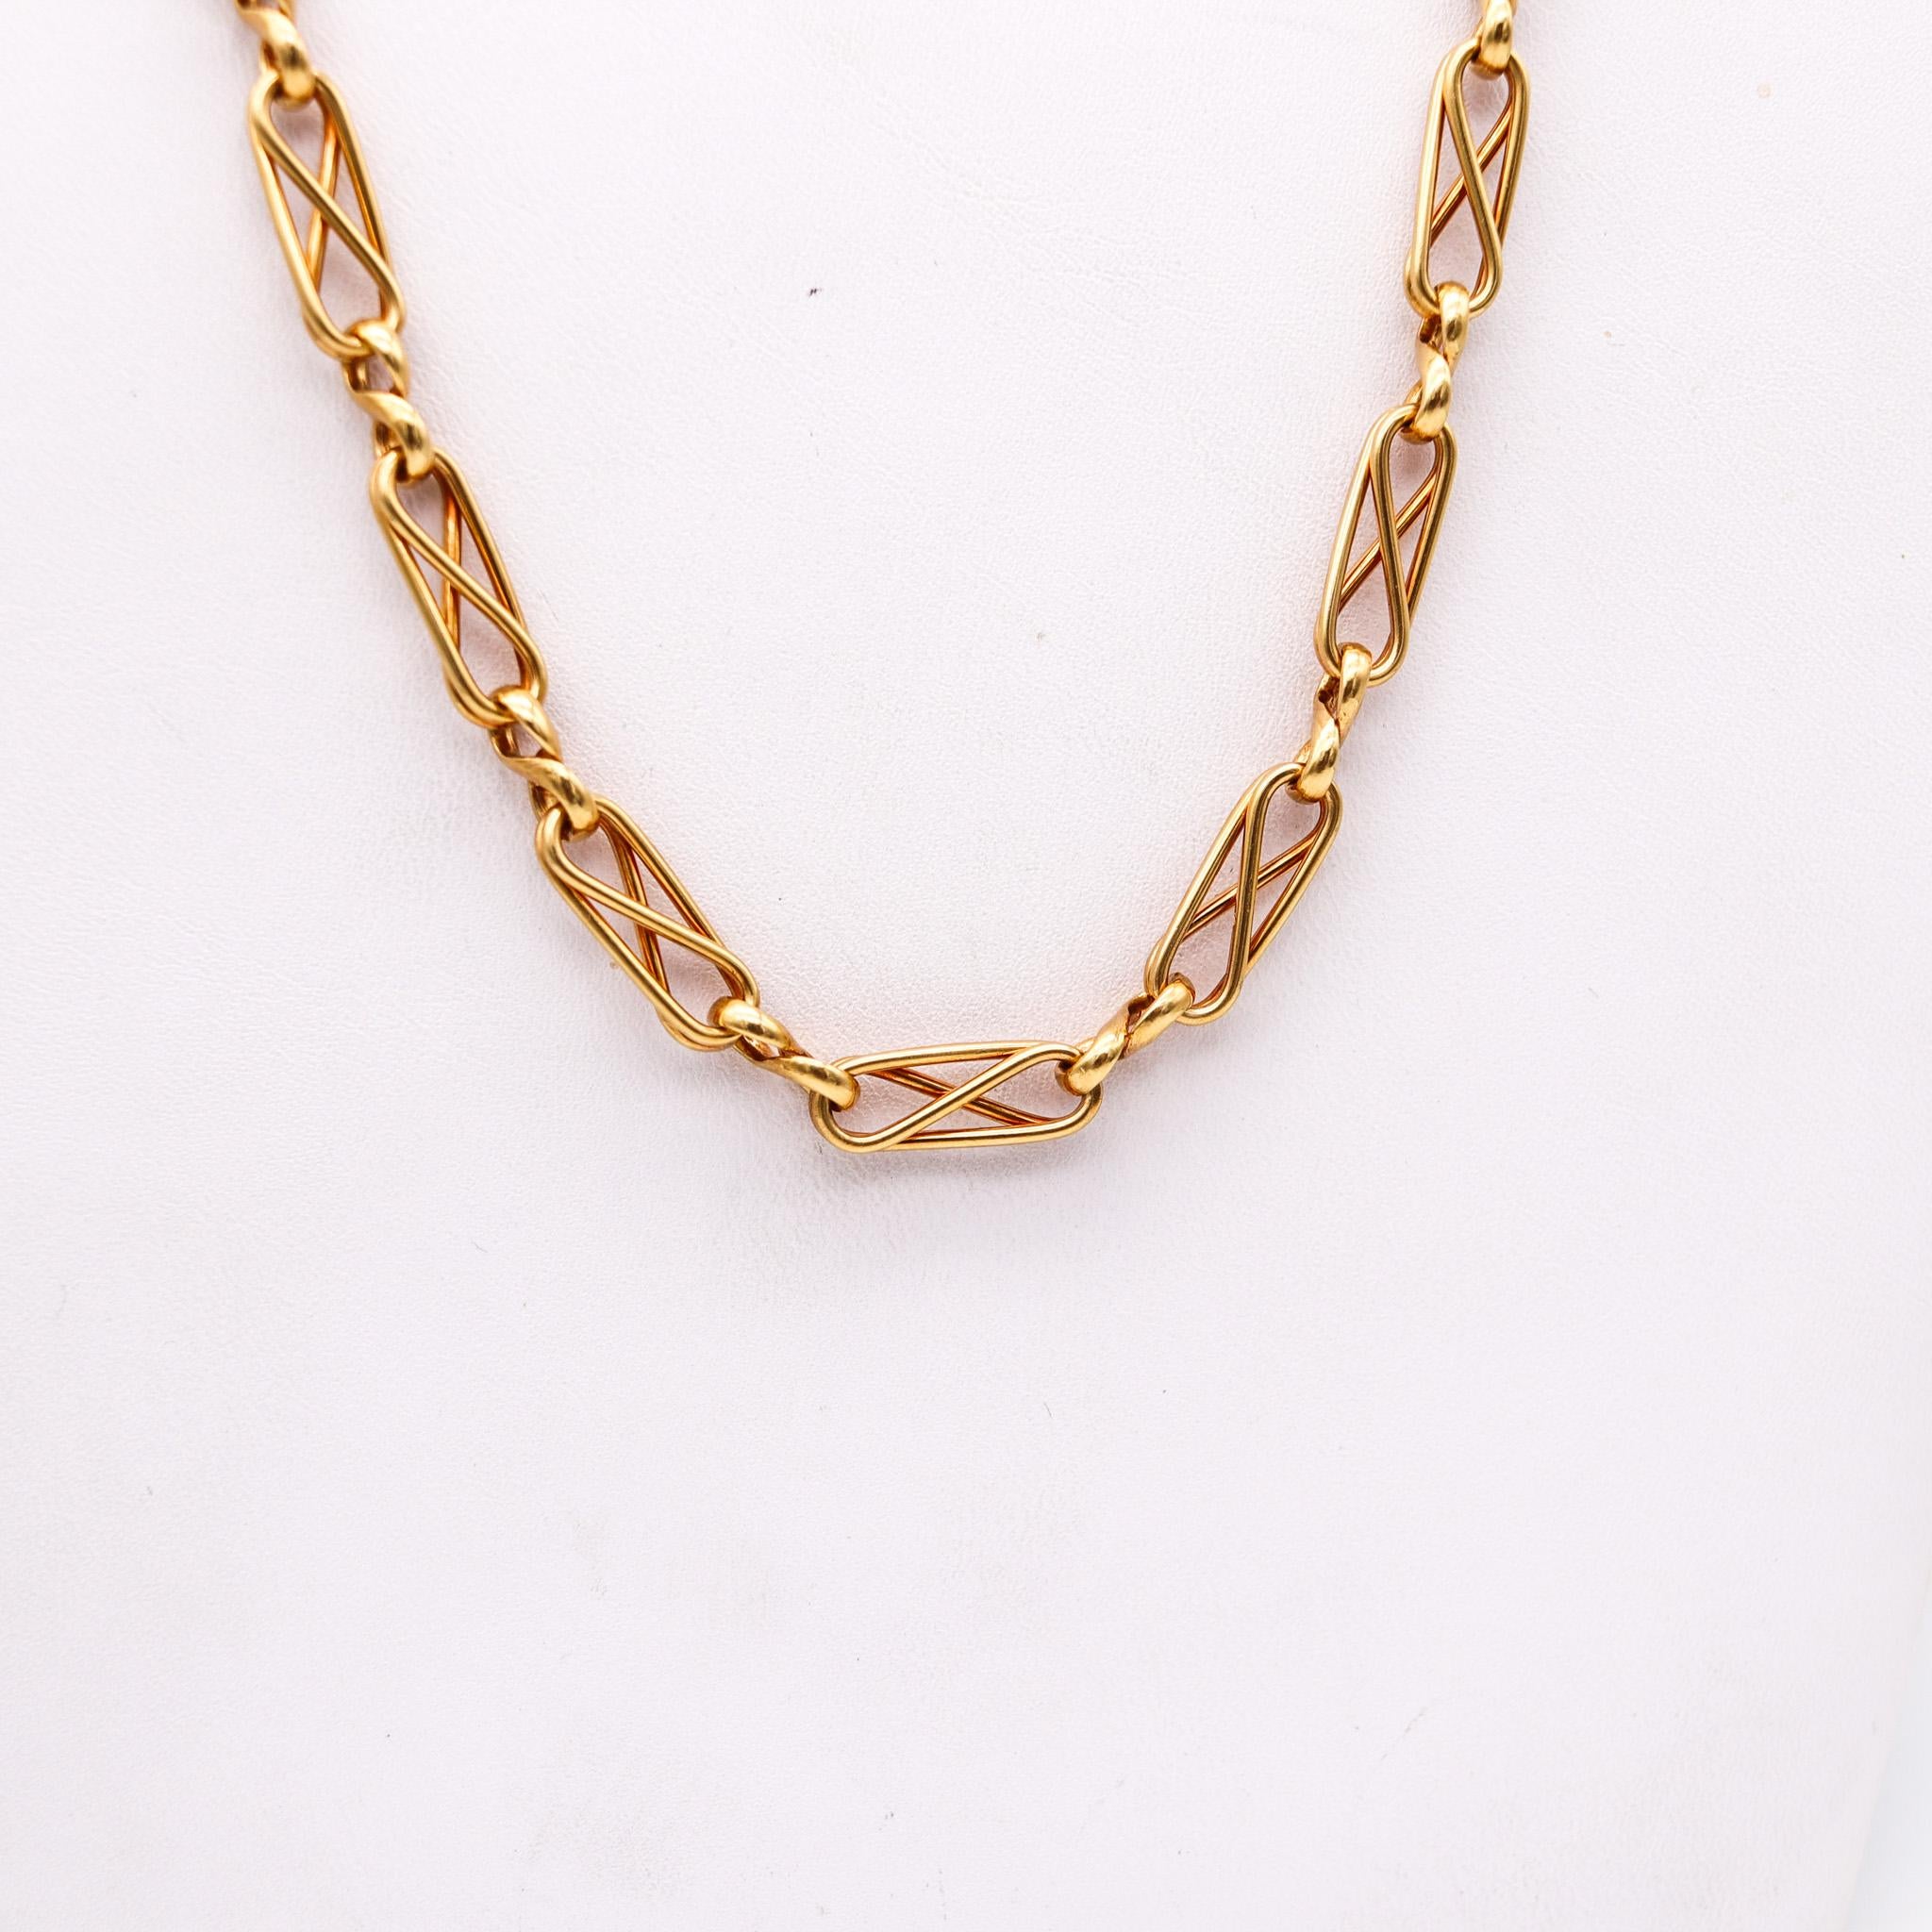 A rare Cartier chain designed by George L'enfant.

Exceptionally rare chain created in Paris France at the jewelry atelier of George L'Enfant for the jewelry house of Cartier, back in the 1960. This fabulous chain has been crafted in solid yellow